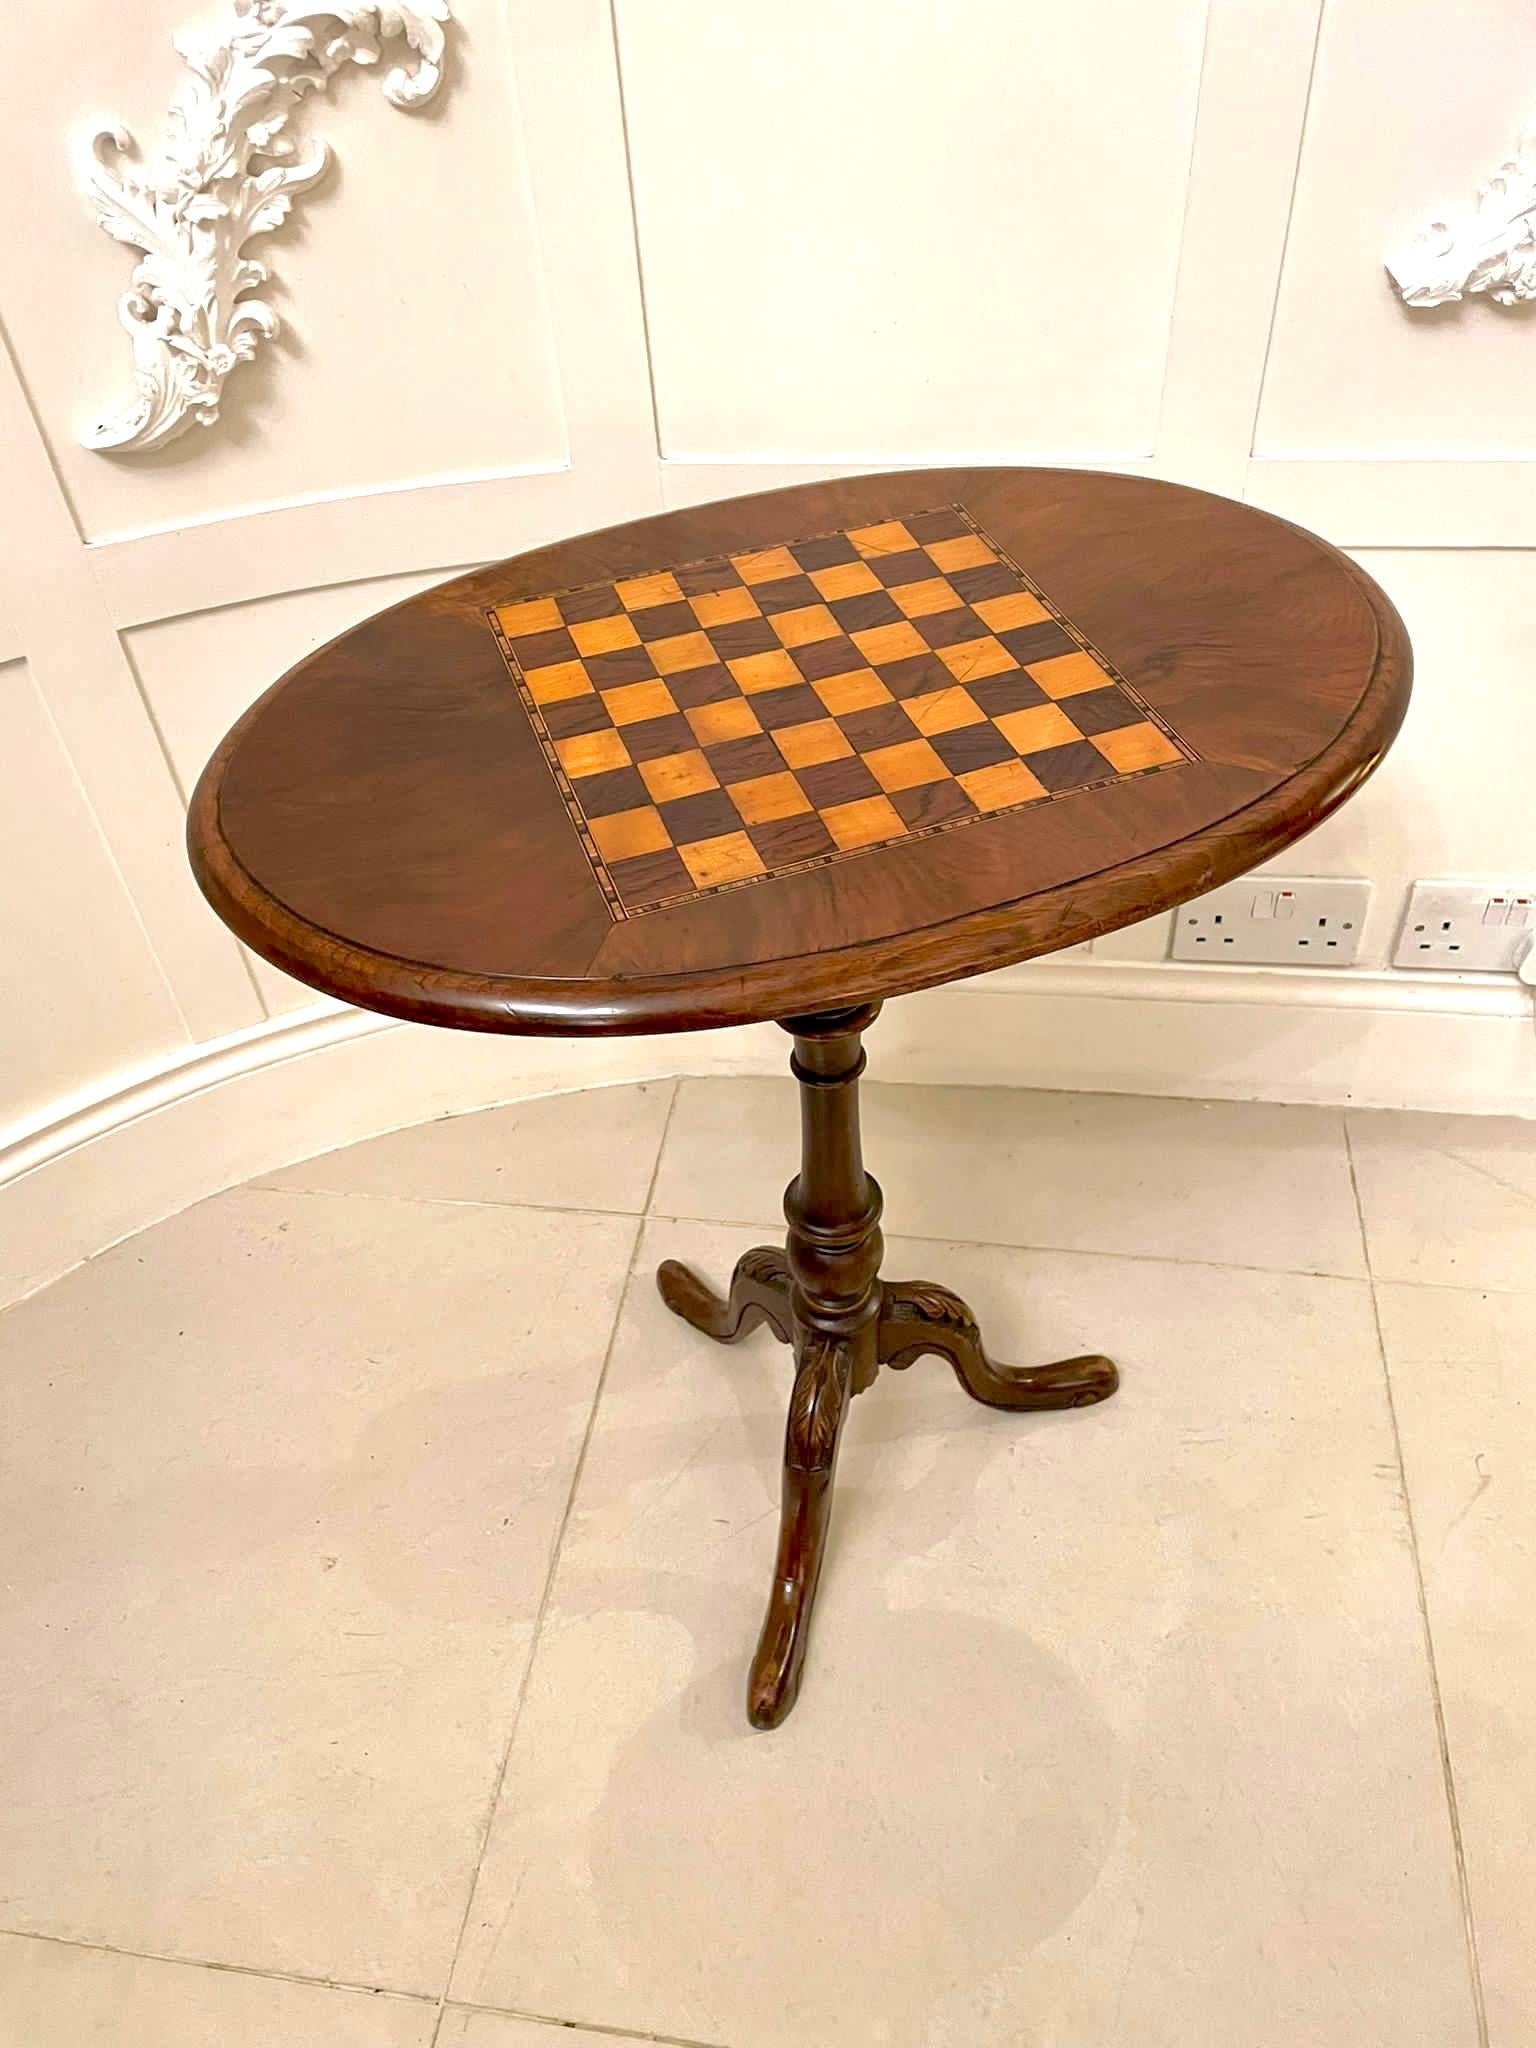 English Antique Victorian Quality Figured Walnut Oval Shaped Chess Top Table